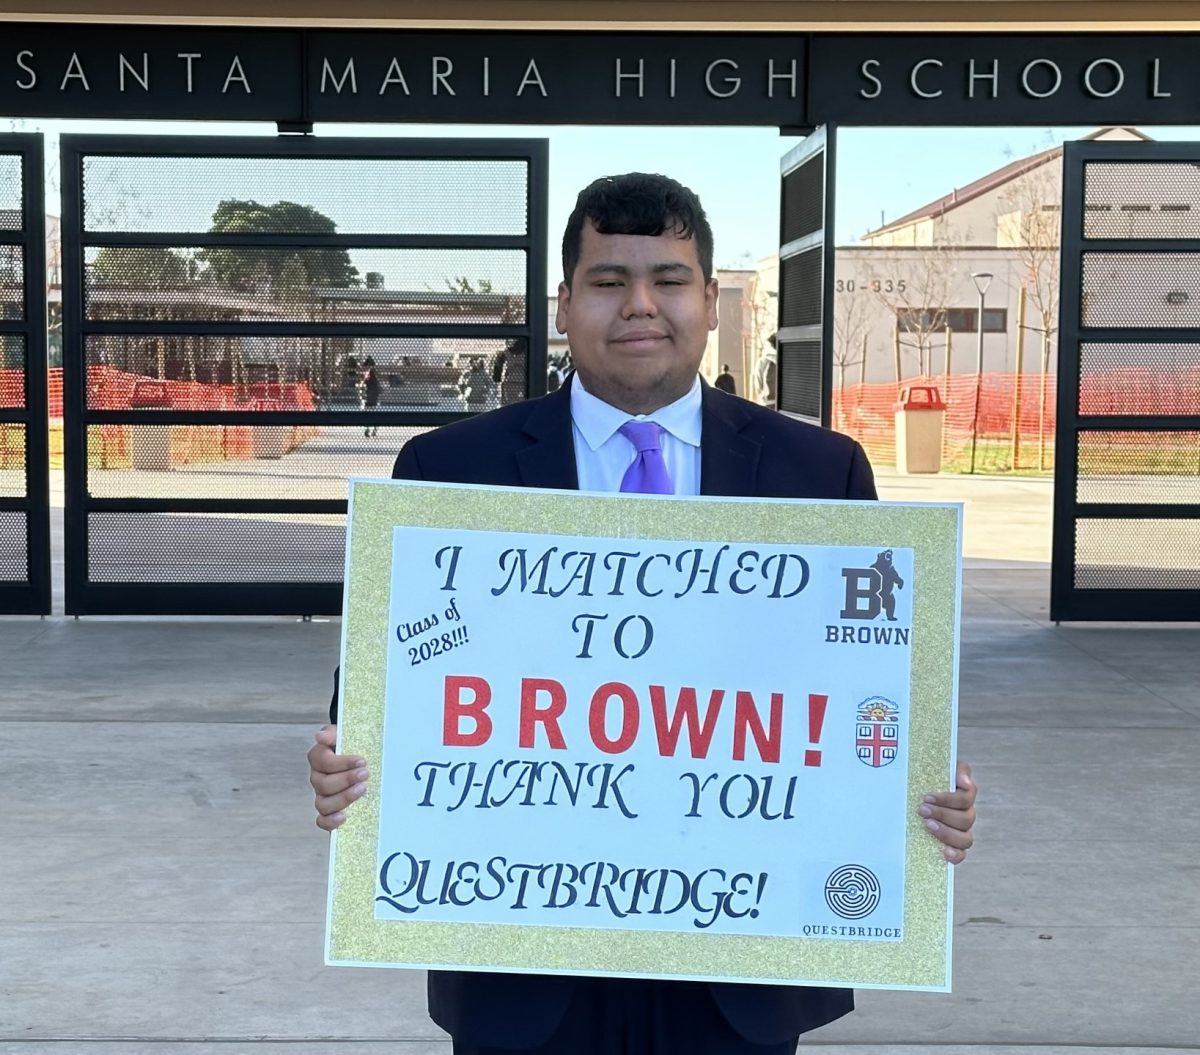 Santa Maria High School Senior Student Abraham Carrillo holding a poser, showing us that hes been match to Brown by QuestBridge. Photo Provided By Ms. Pineda